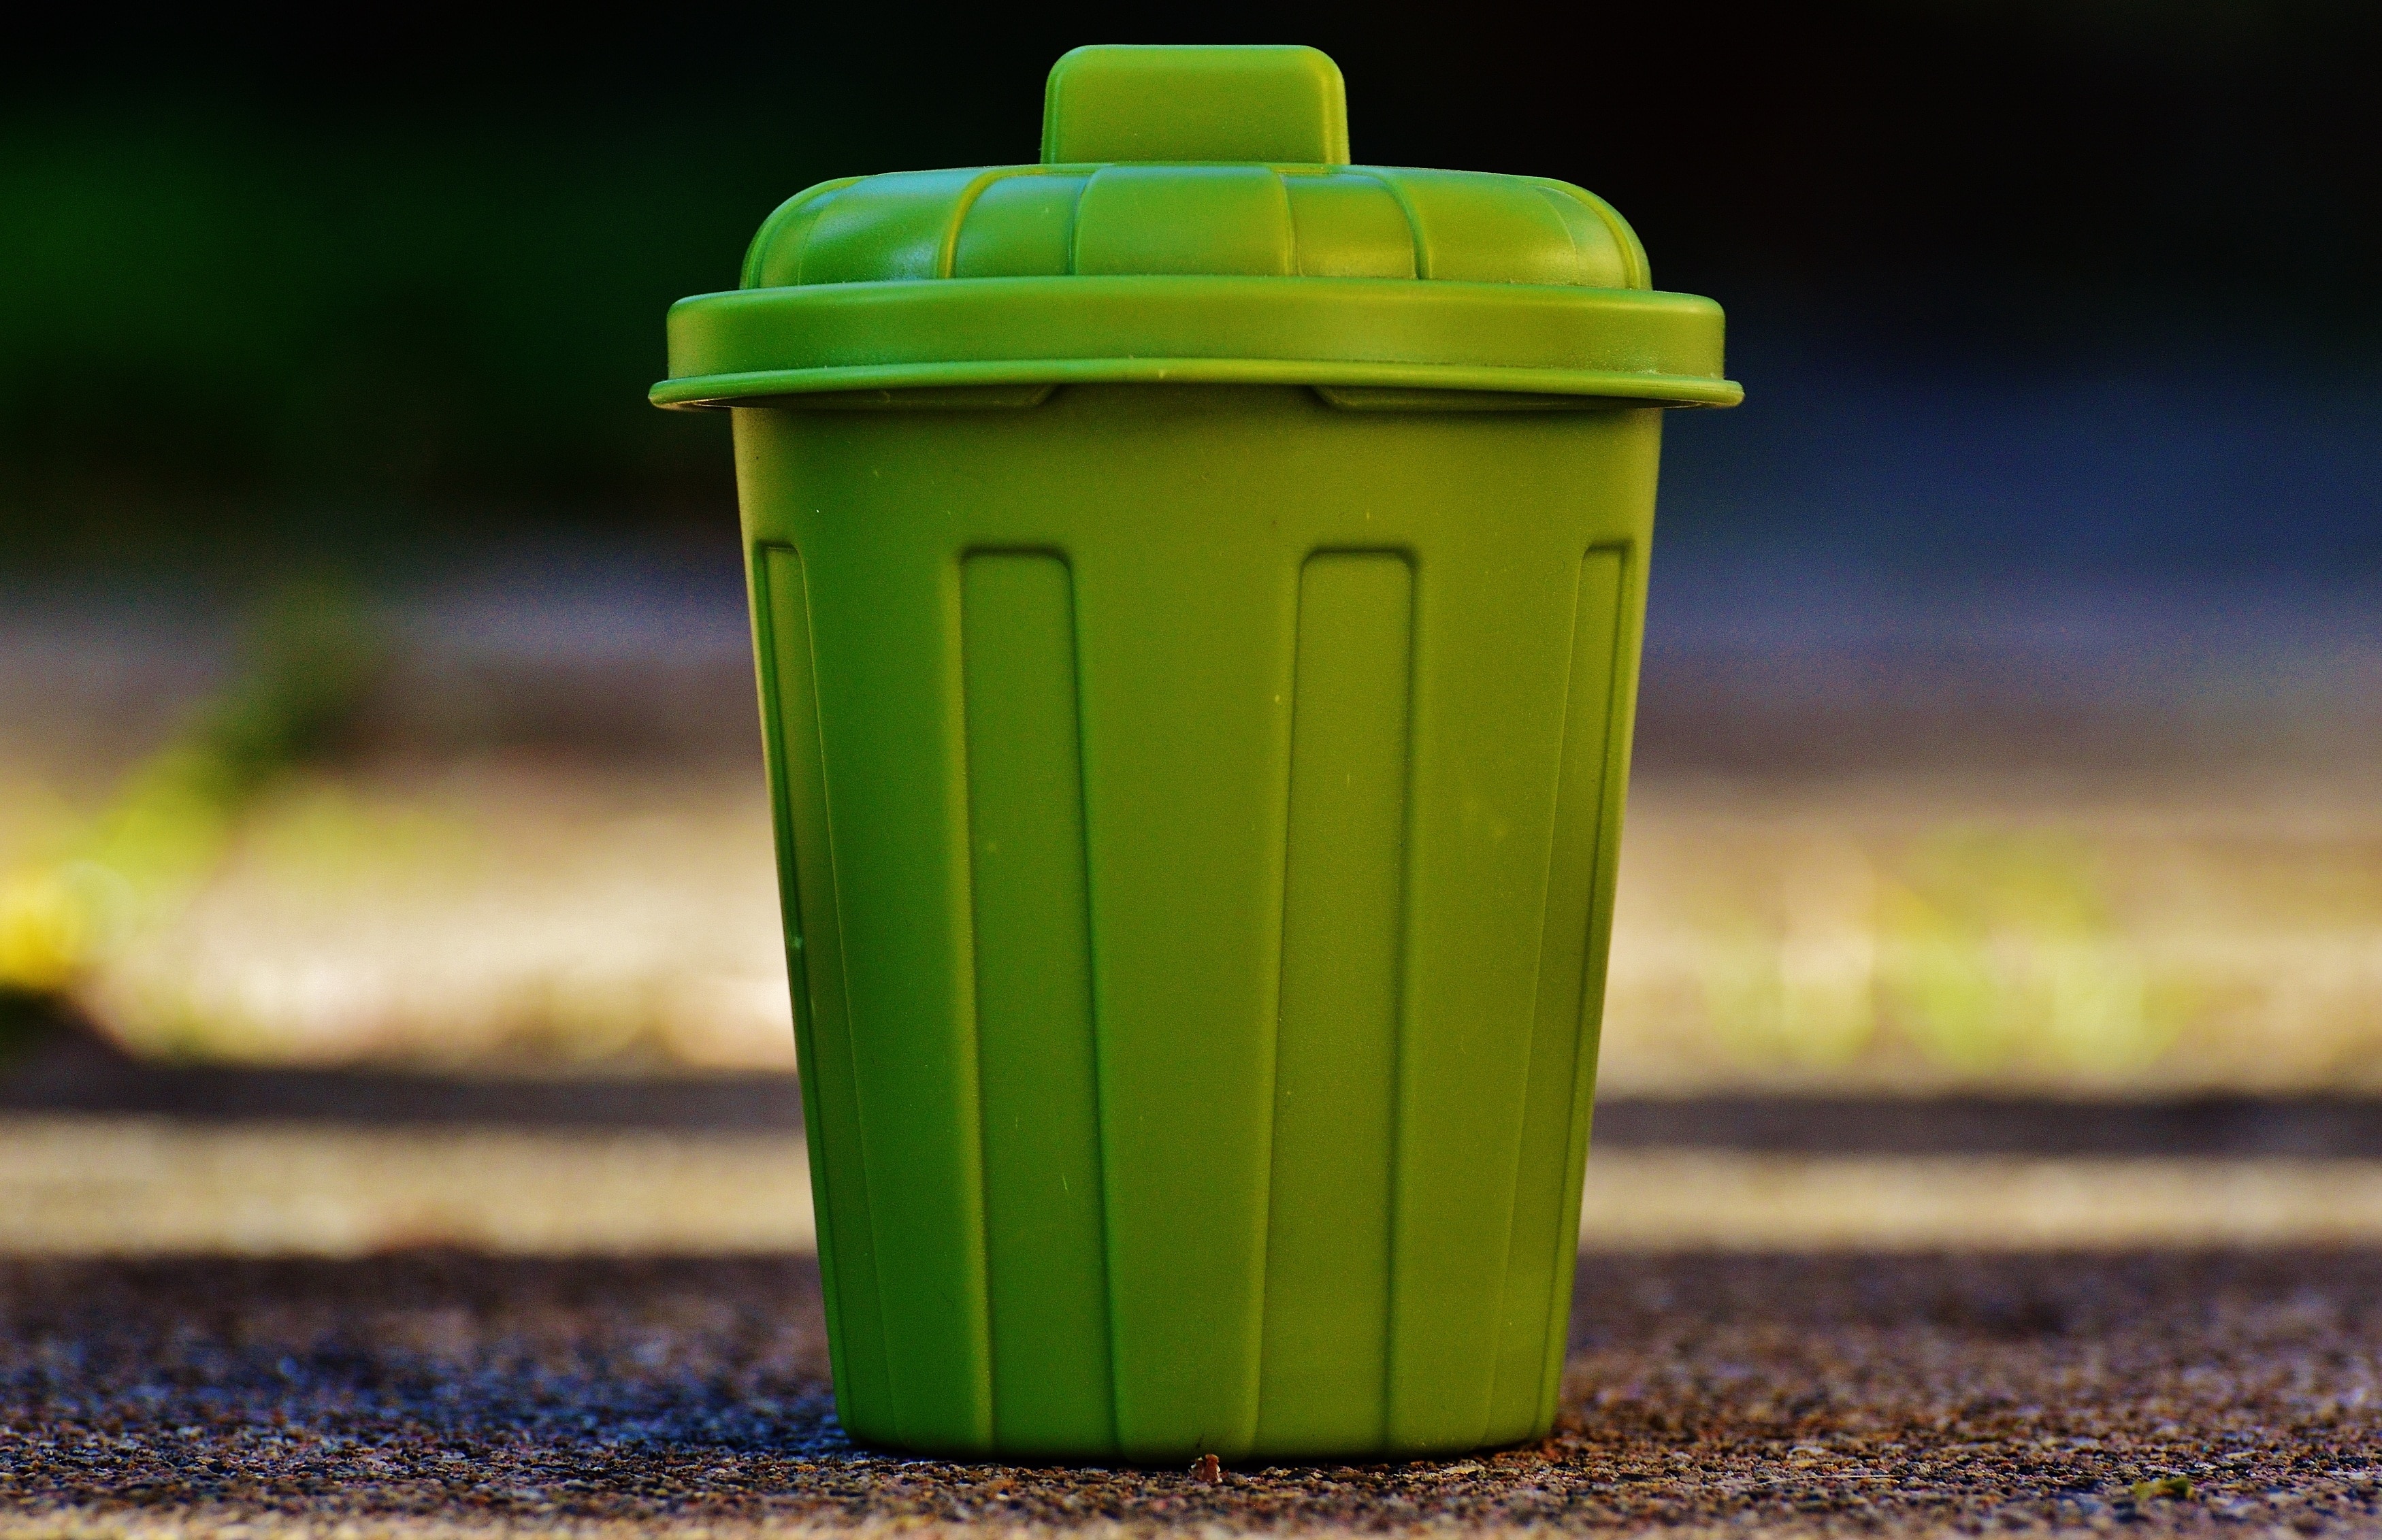 Bucket, Garbage Can, Green, Garbage, green color, focus on foreground